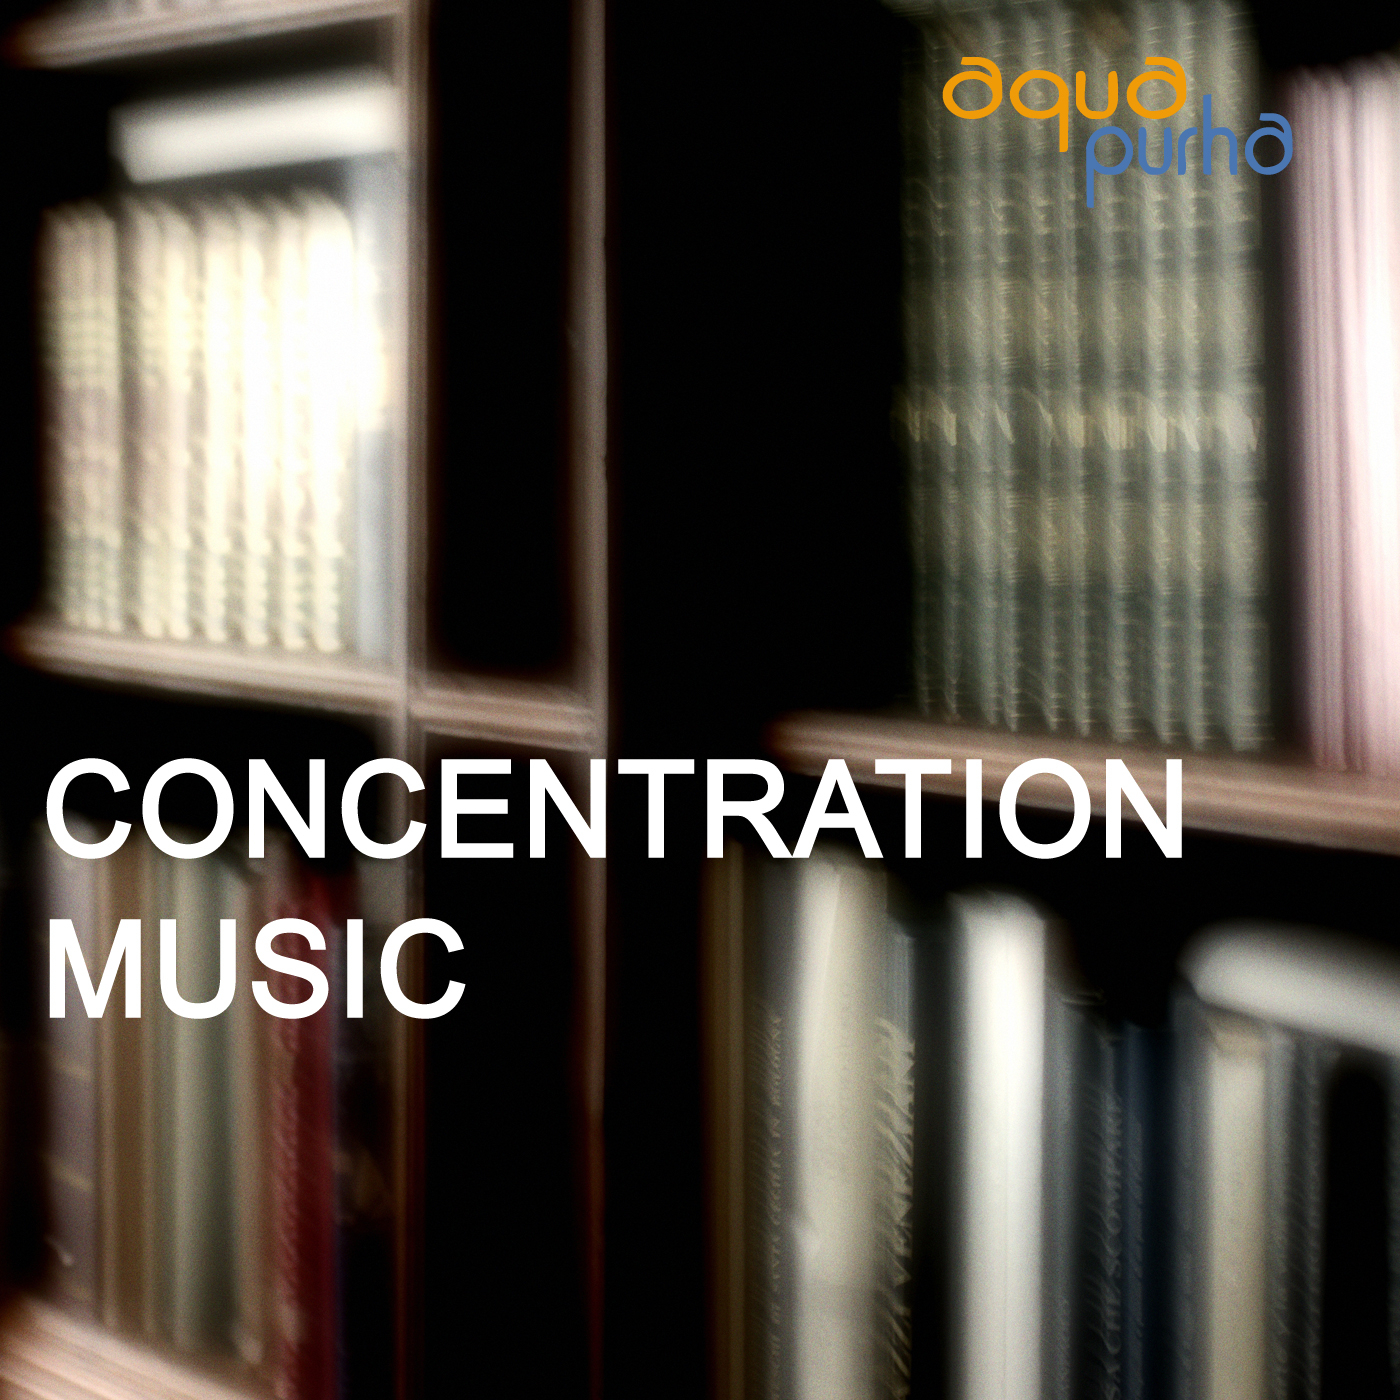 Concentration Music - Classical Music to Study to. Music for Studying and Reading